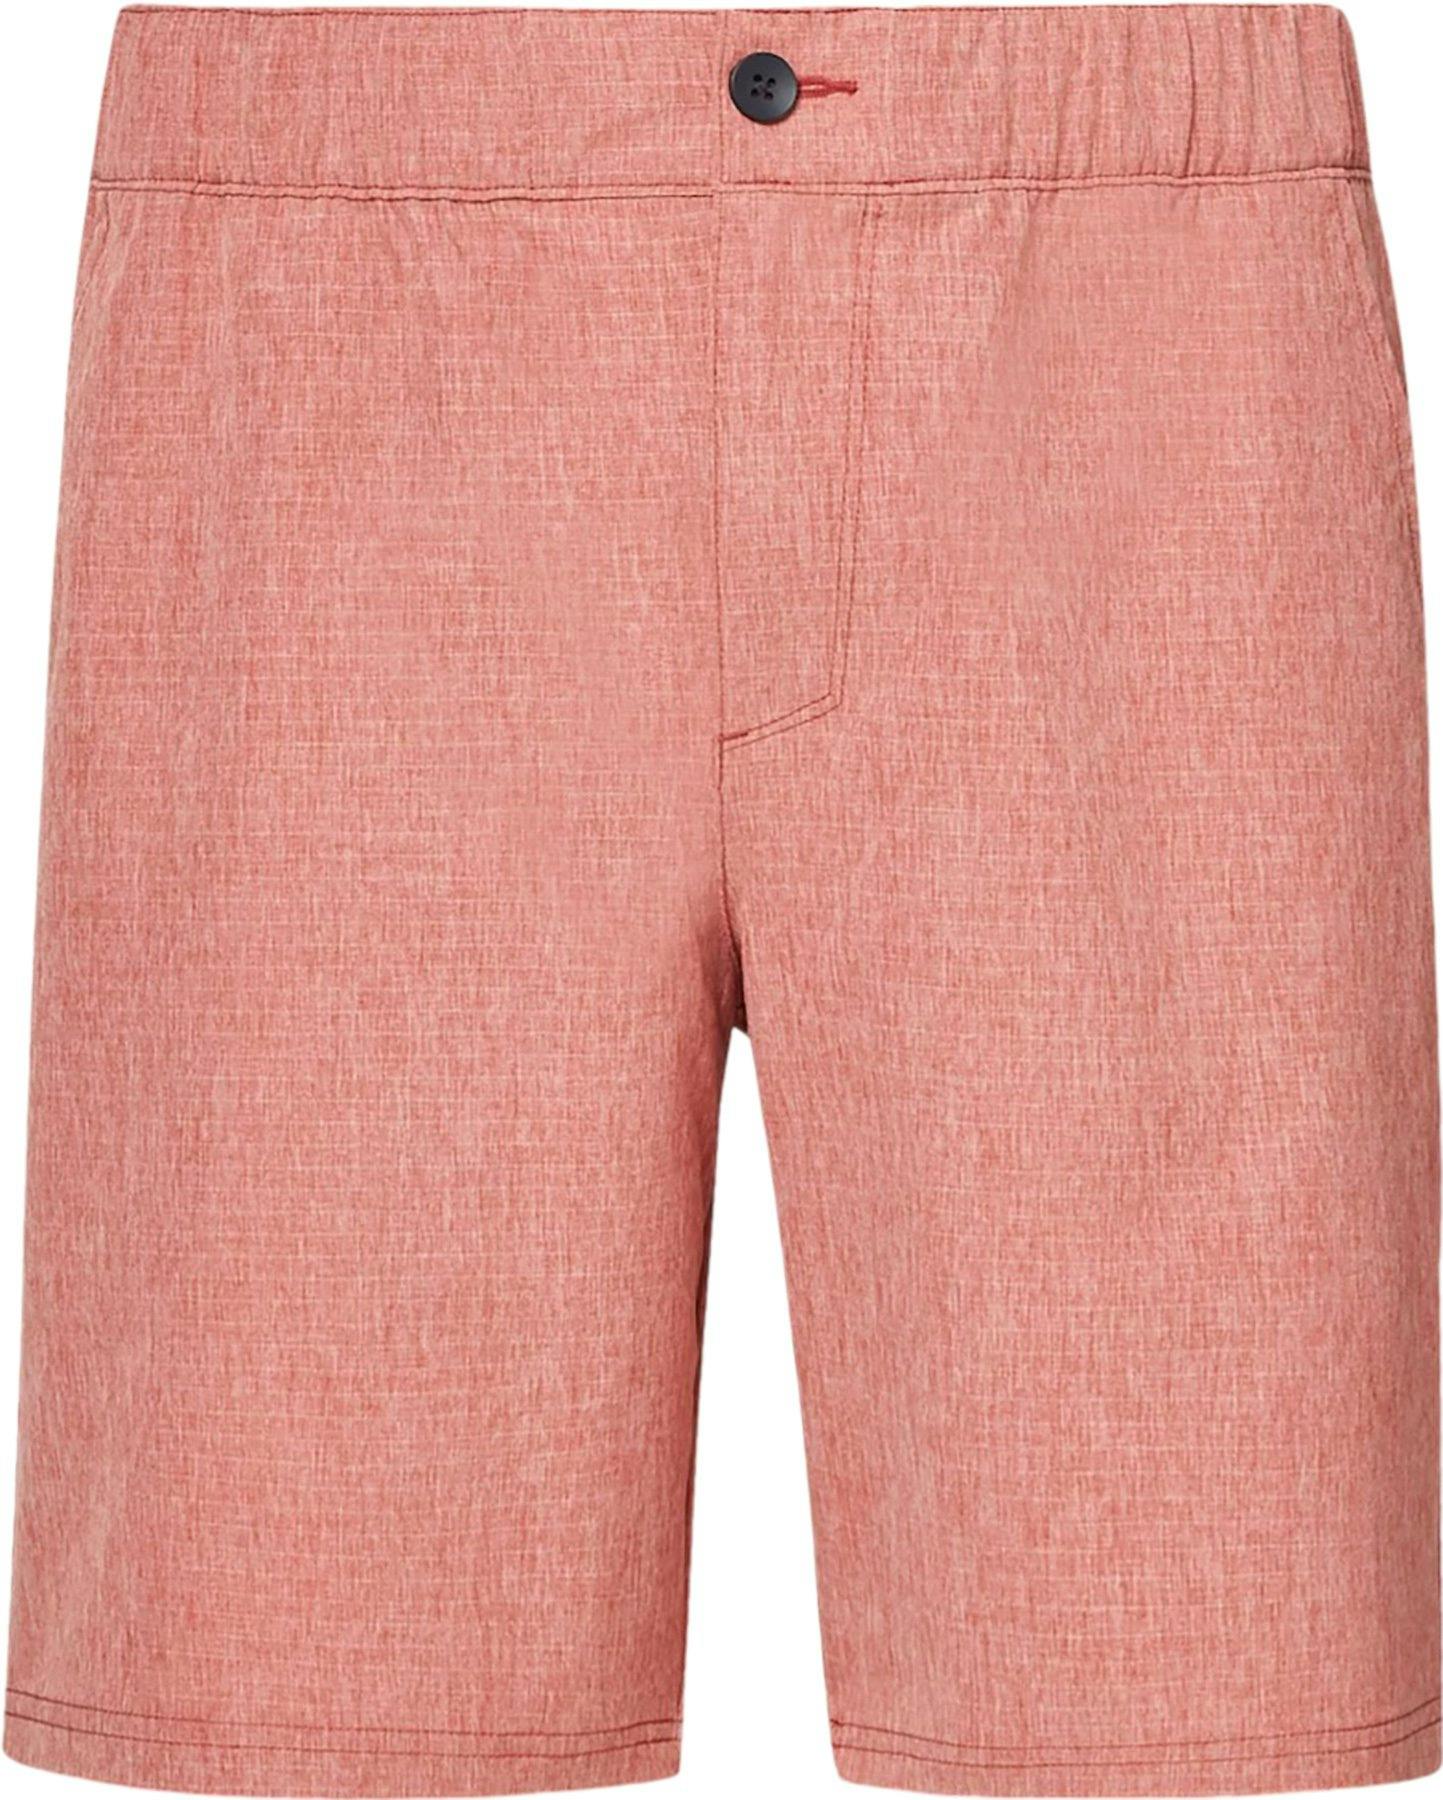 Product image for Adventure Chino Shorts - Men's